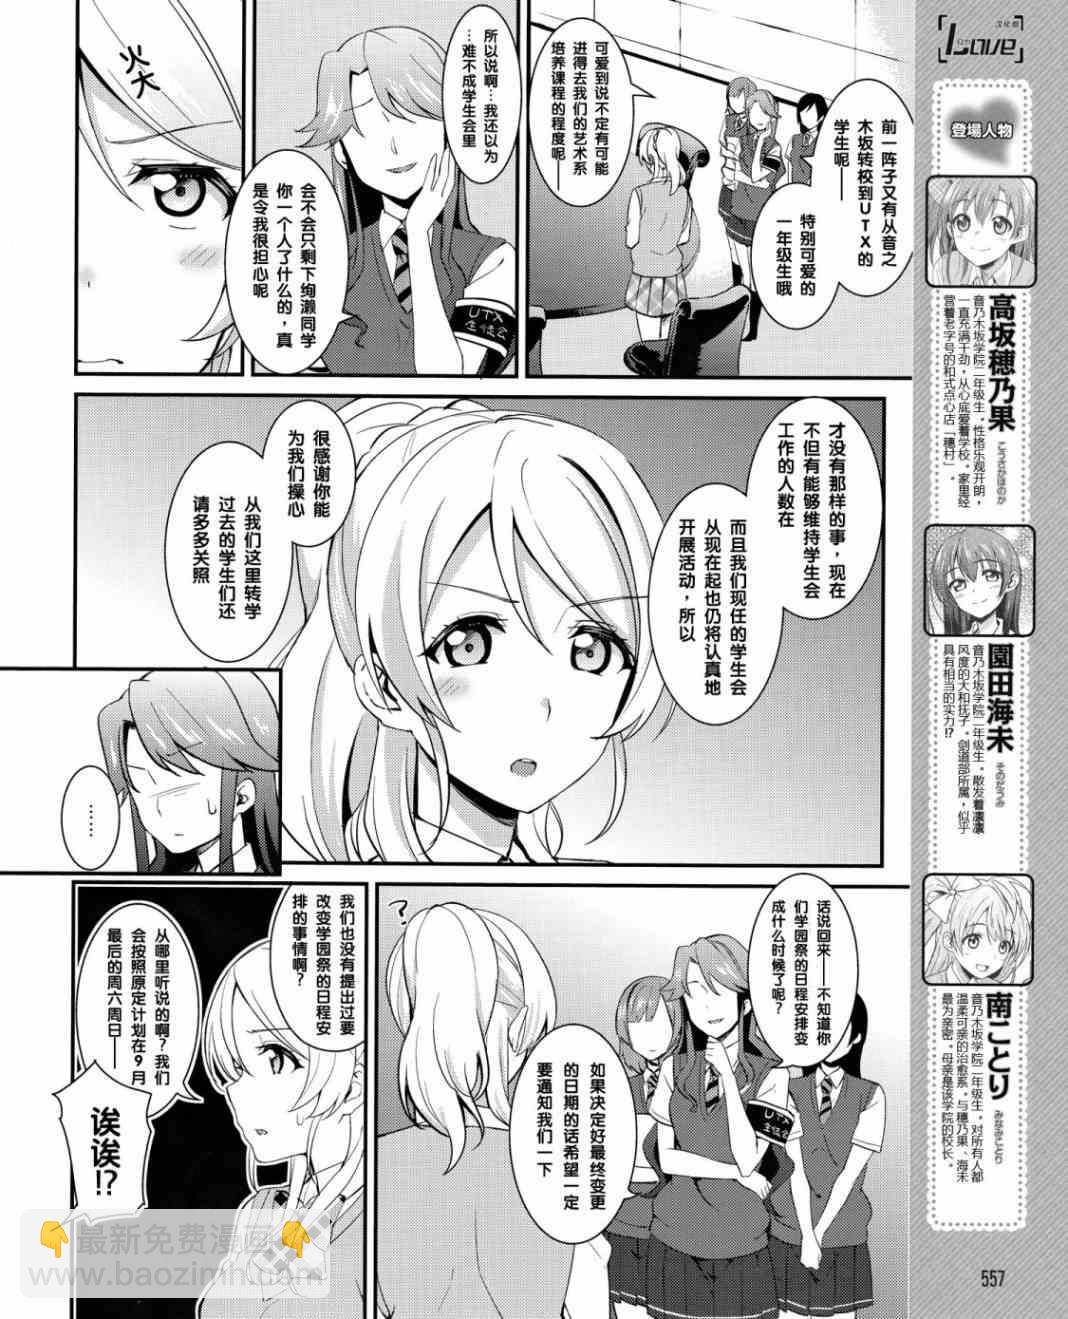 LoveLive - 19話 - 3